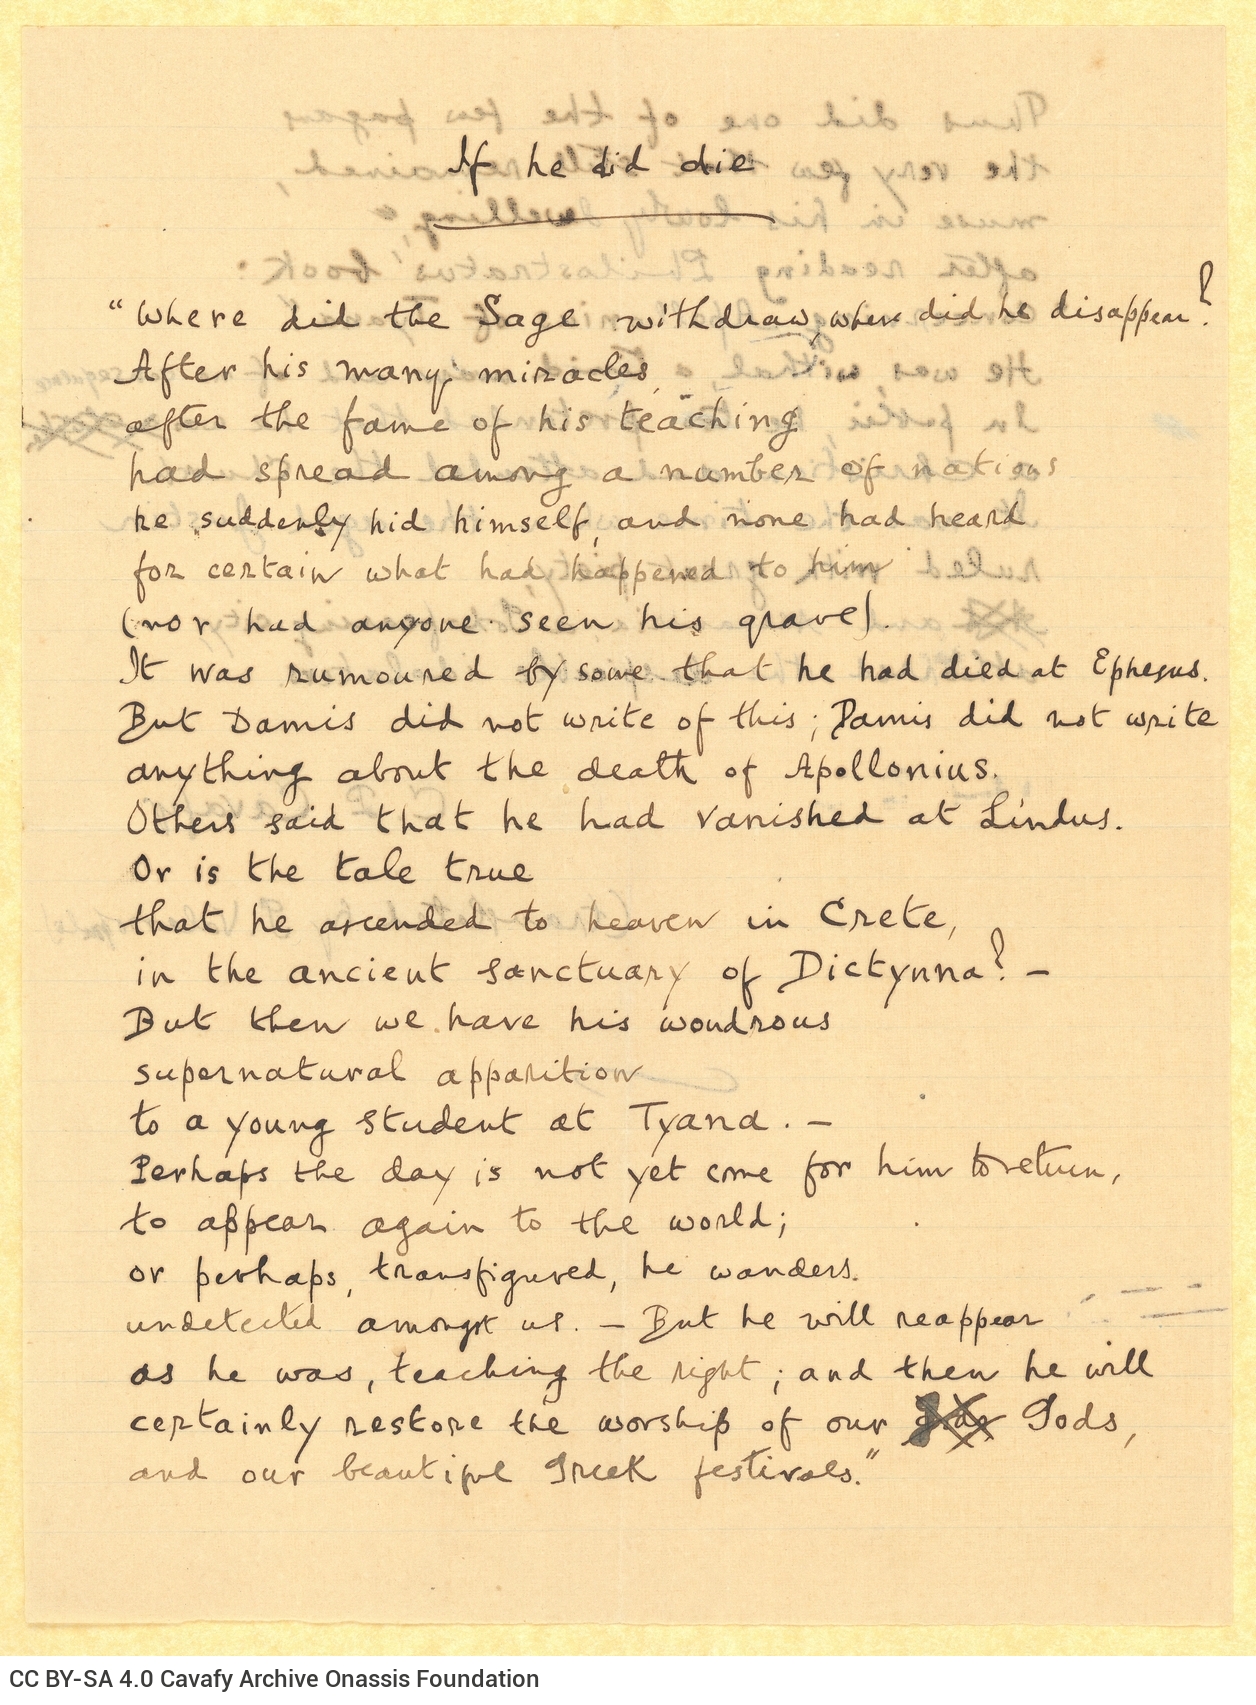 Manuscript by Cavafy with the English translation of the poem "If Indeed He Died" by G. Valassopoulo, on both sides of a r